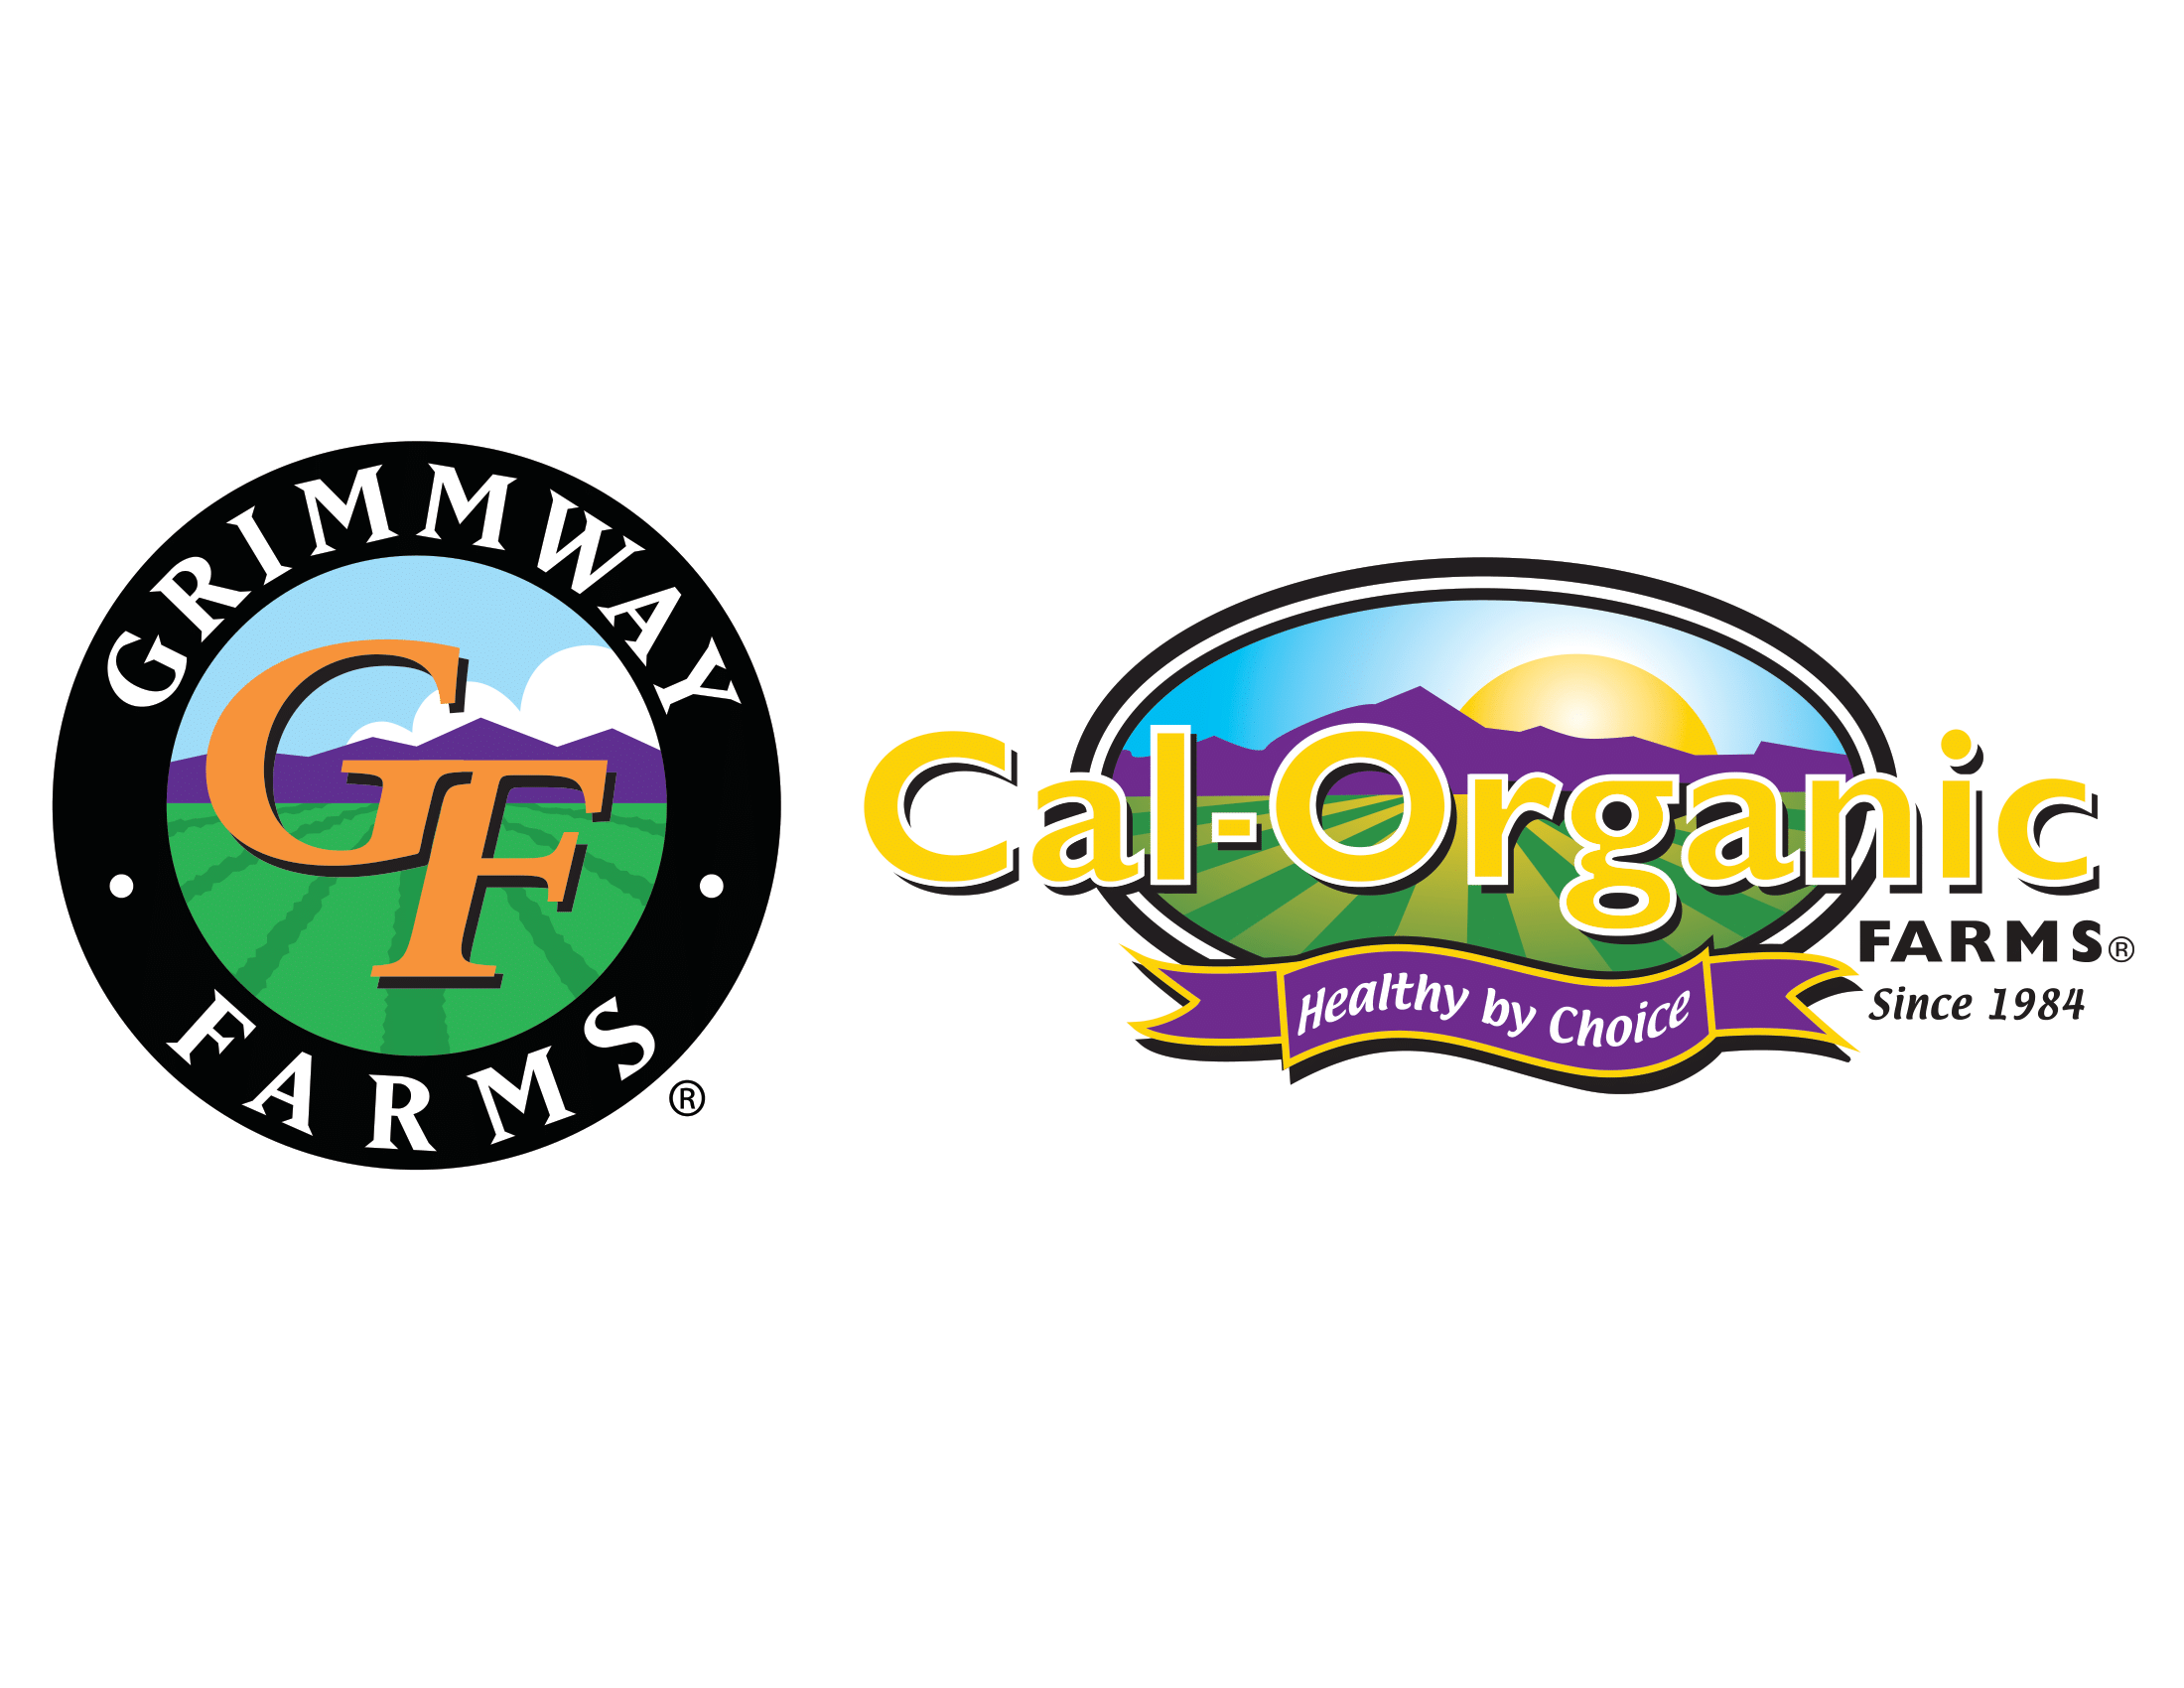 Grimmway Farms logo and Cal-Organic Farms "Healthy by Choice" logo side x side